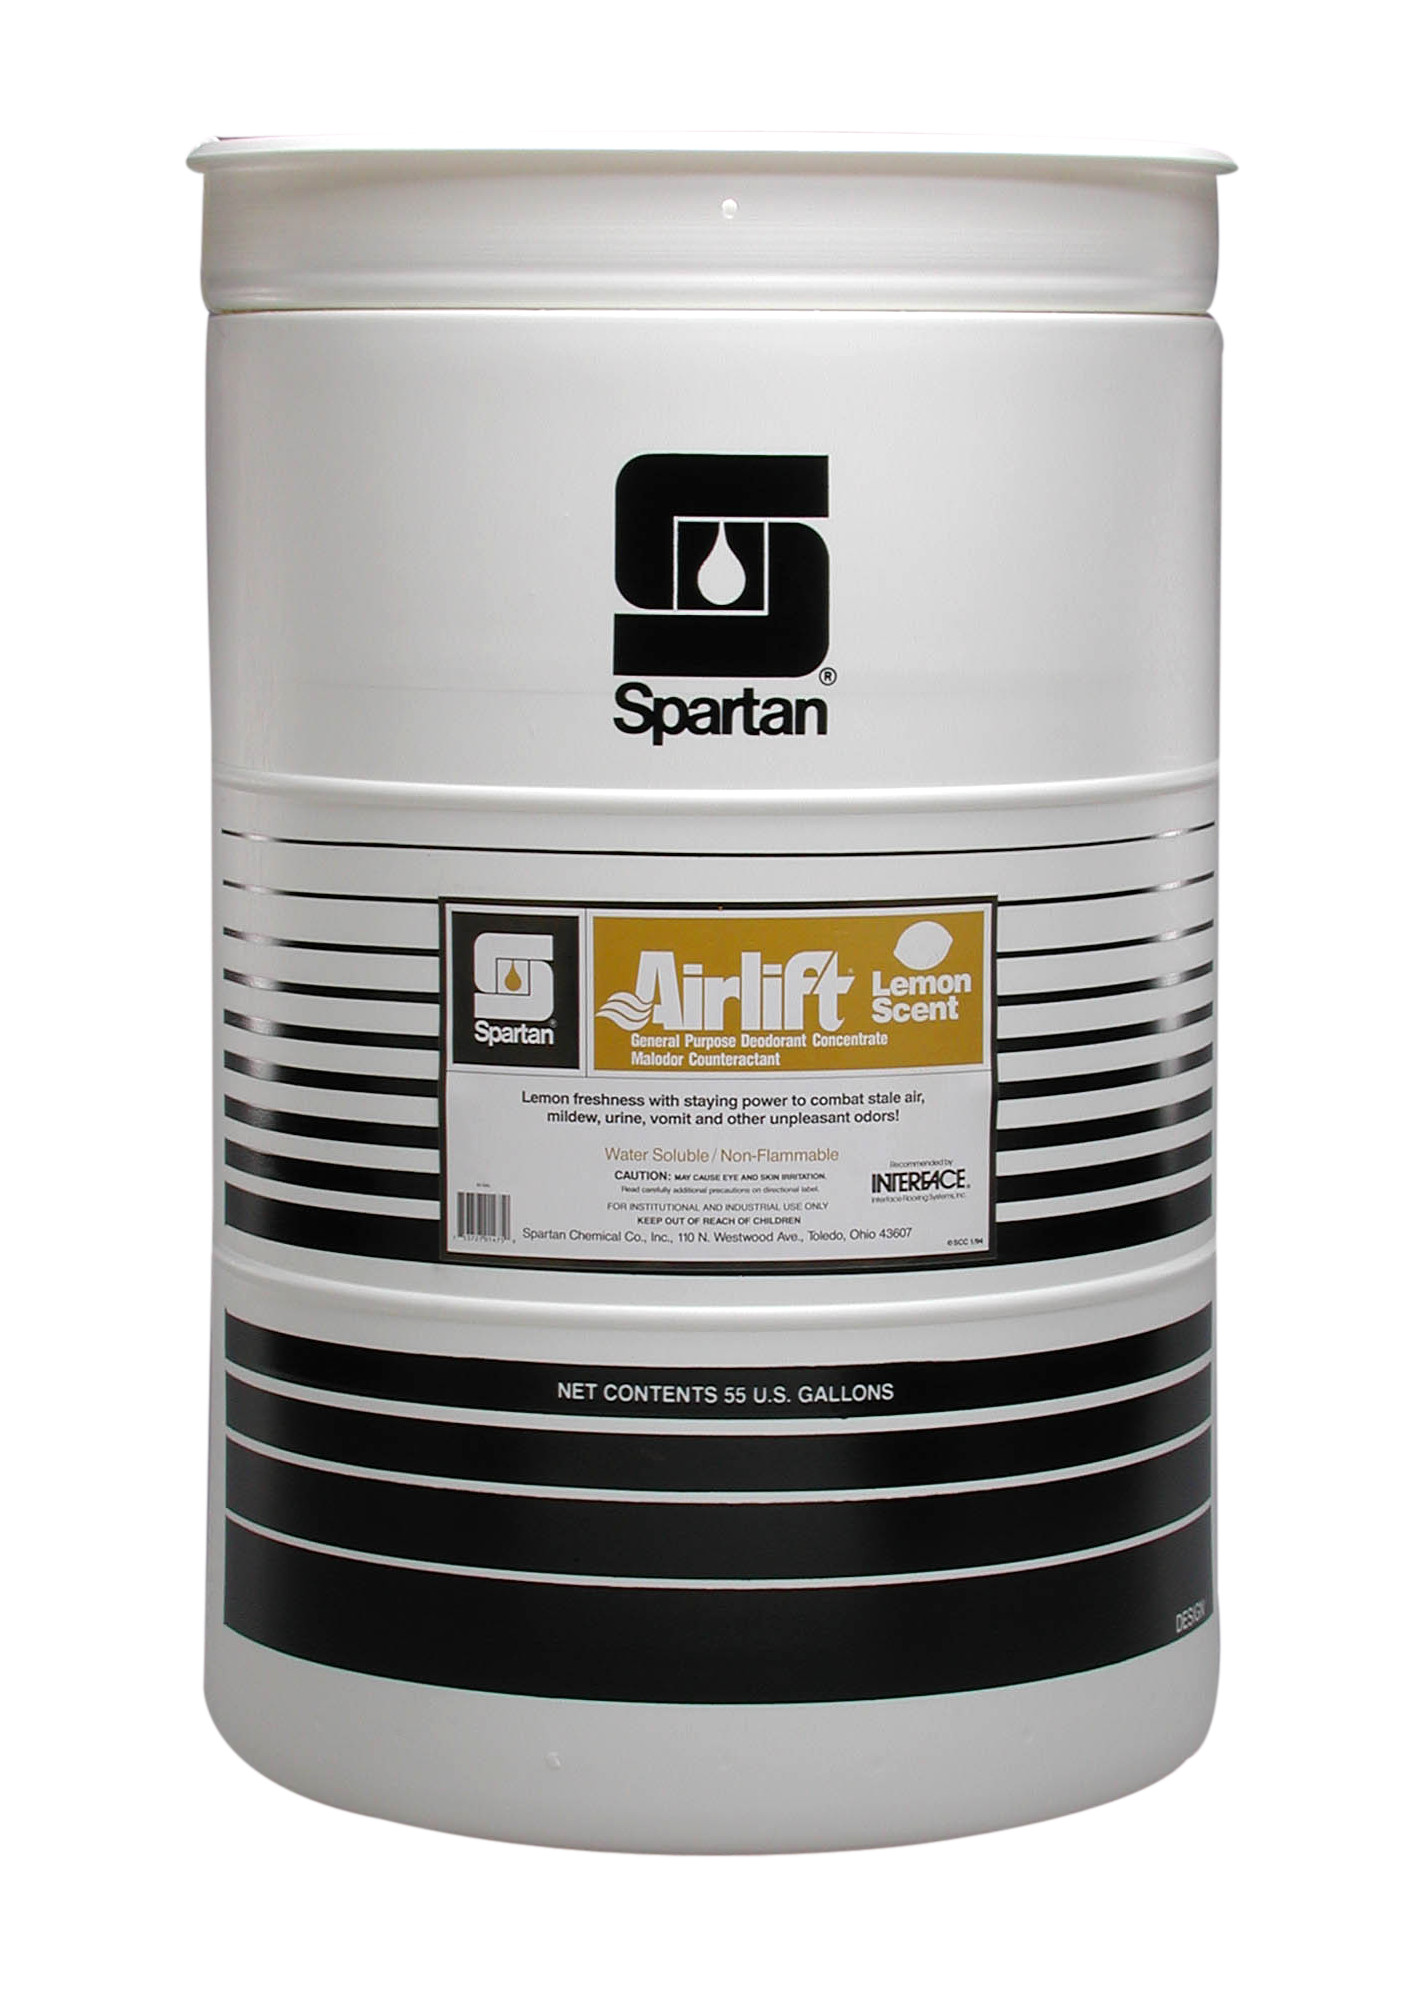 Spartan Chemical Company Airlift Lemon Scent, 55 GAL DRUM